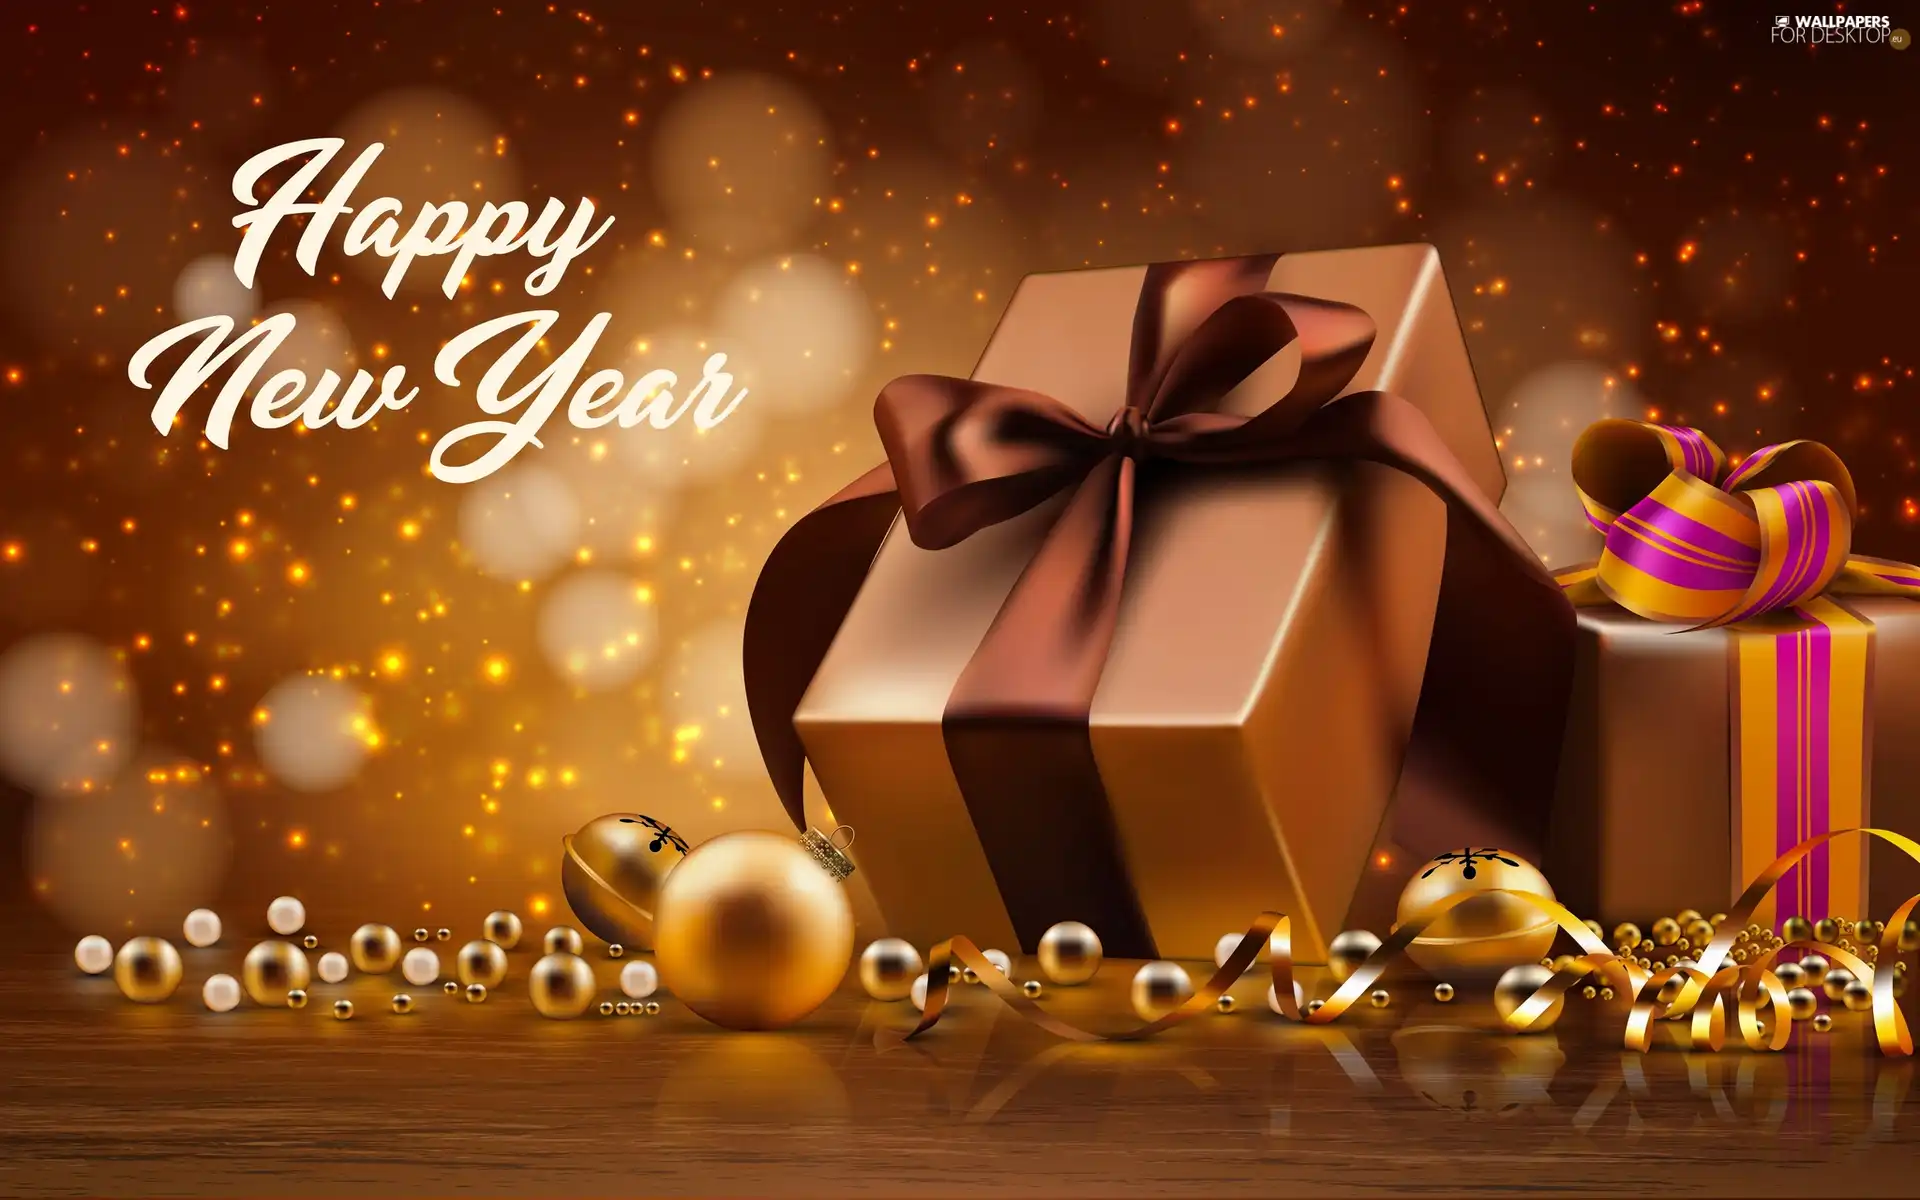 text, New Year, baubles, gifts, happy new year, Wishes